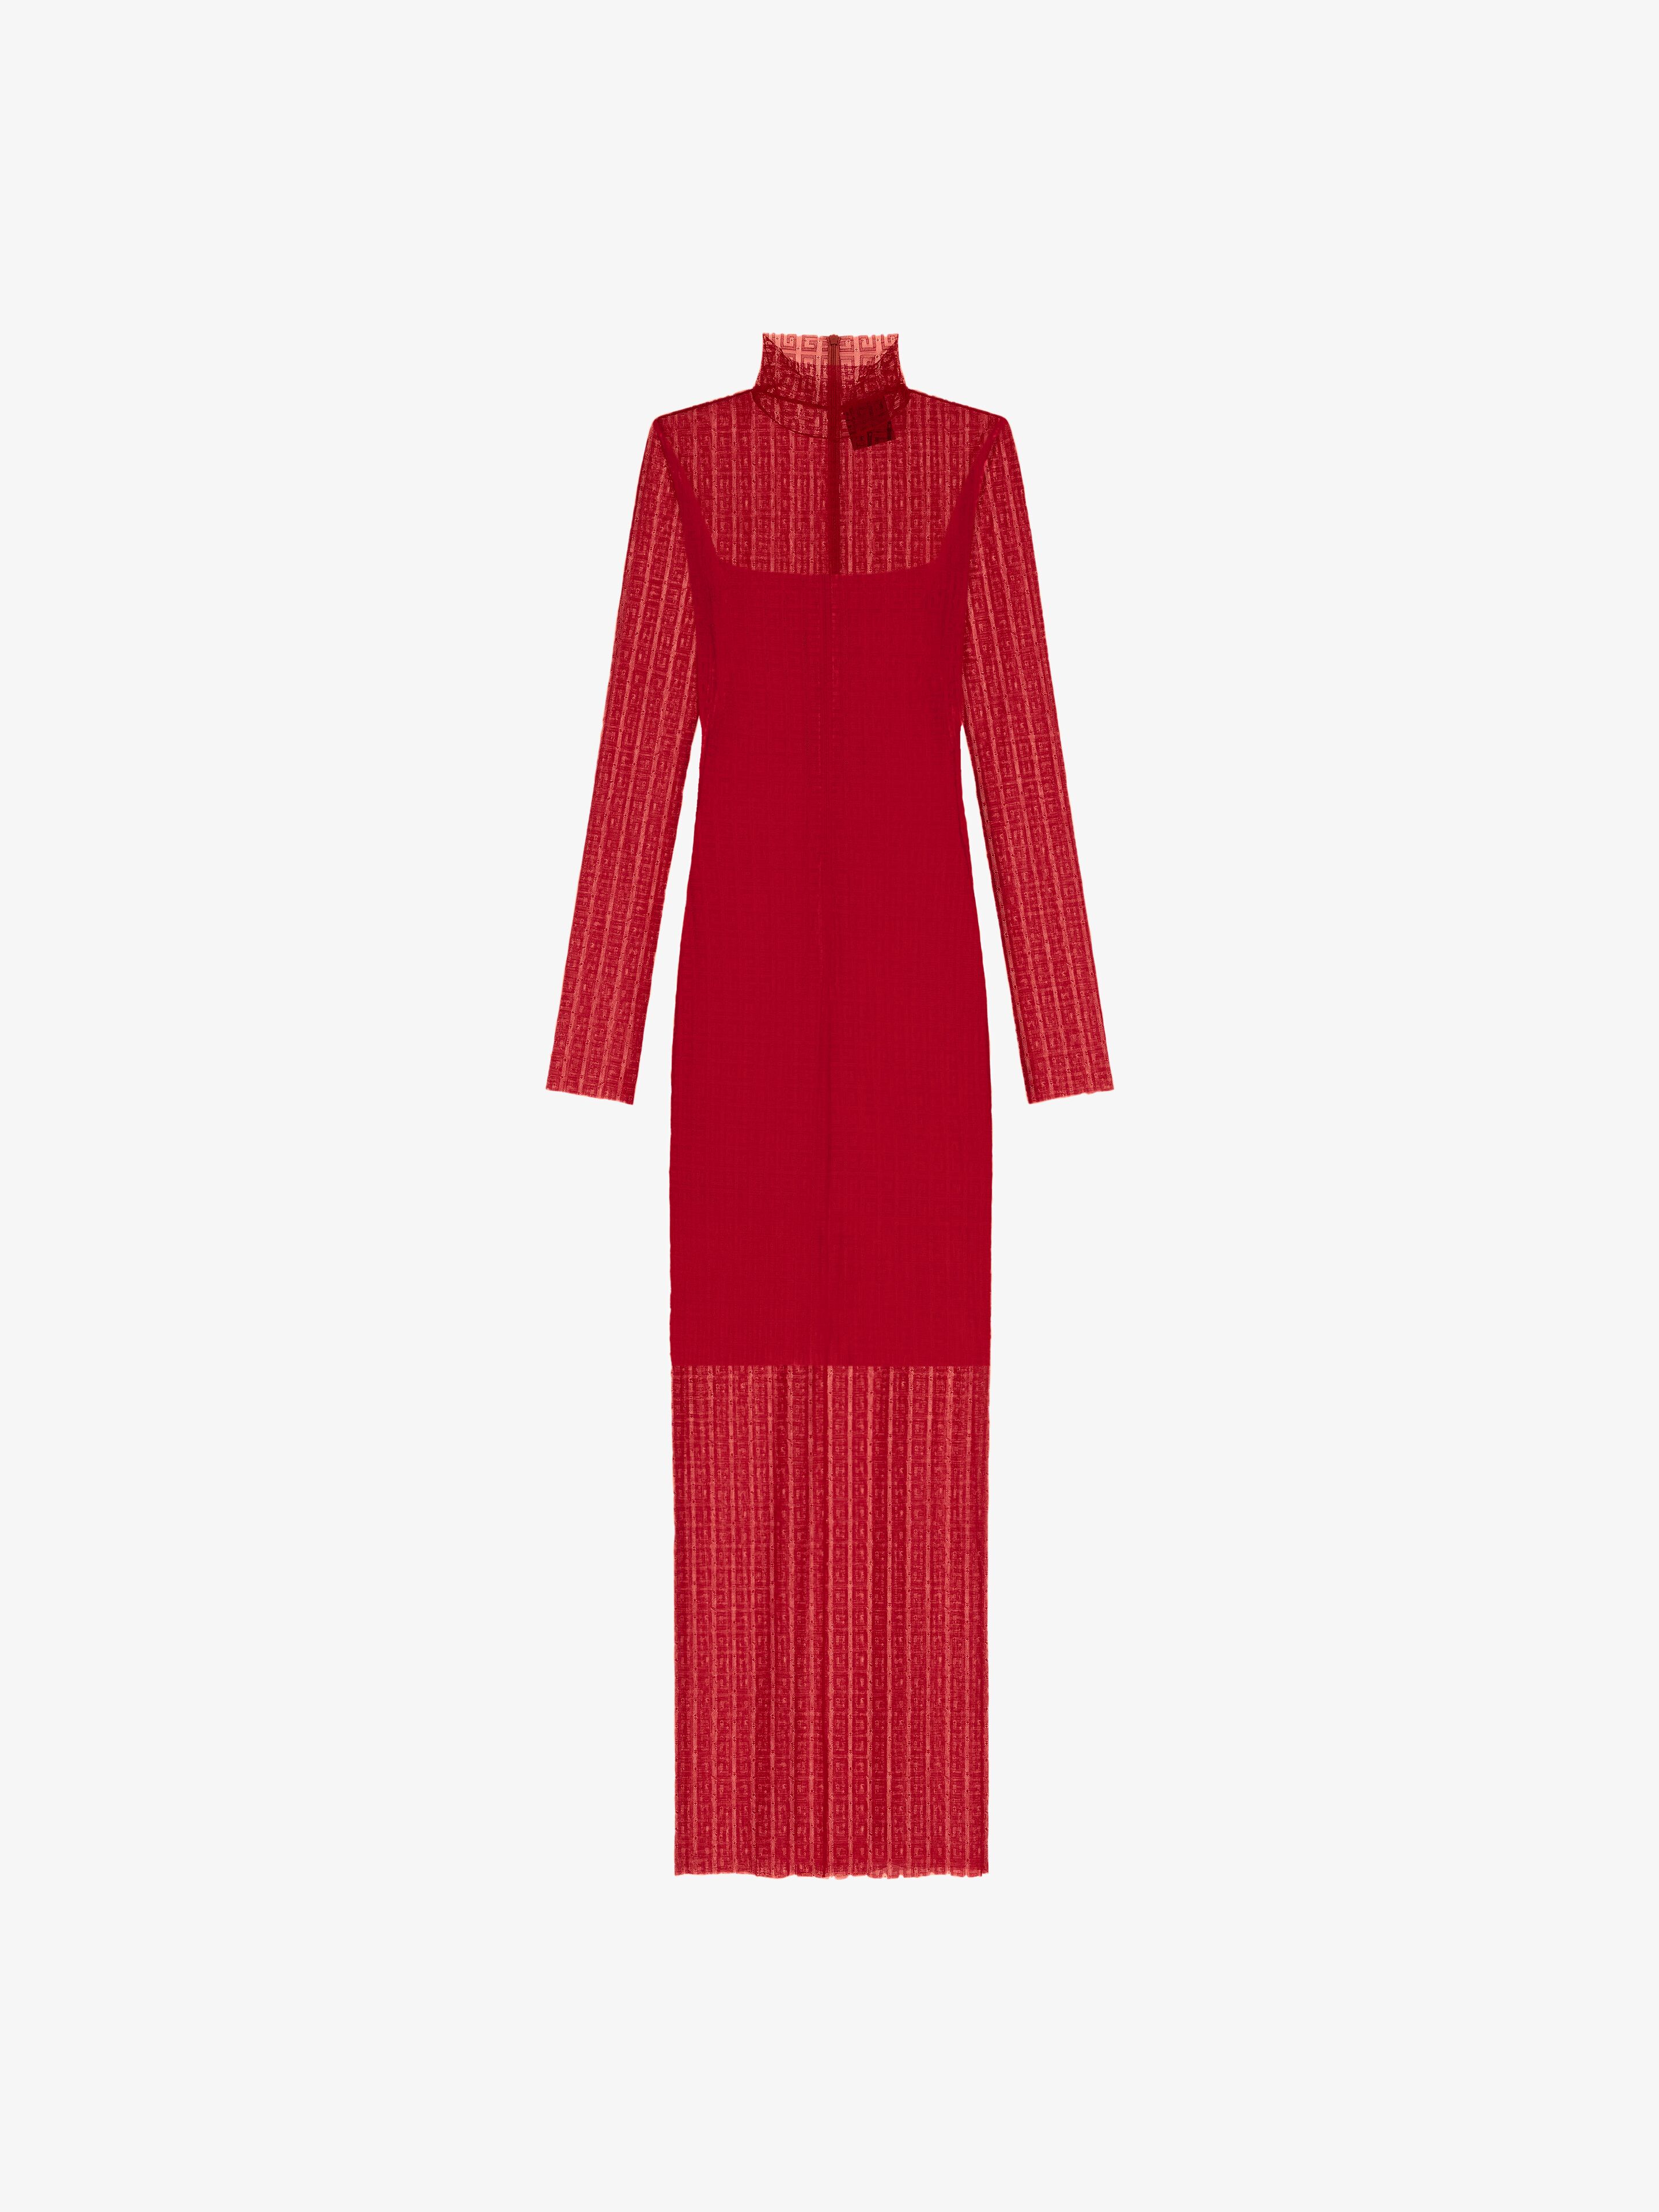 Givenchy Dressing Gown En Dentelle 4g In Red